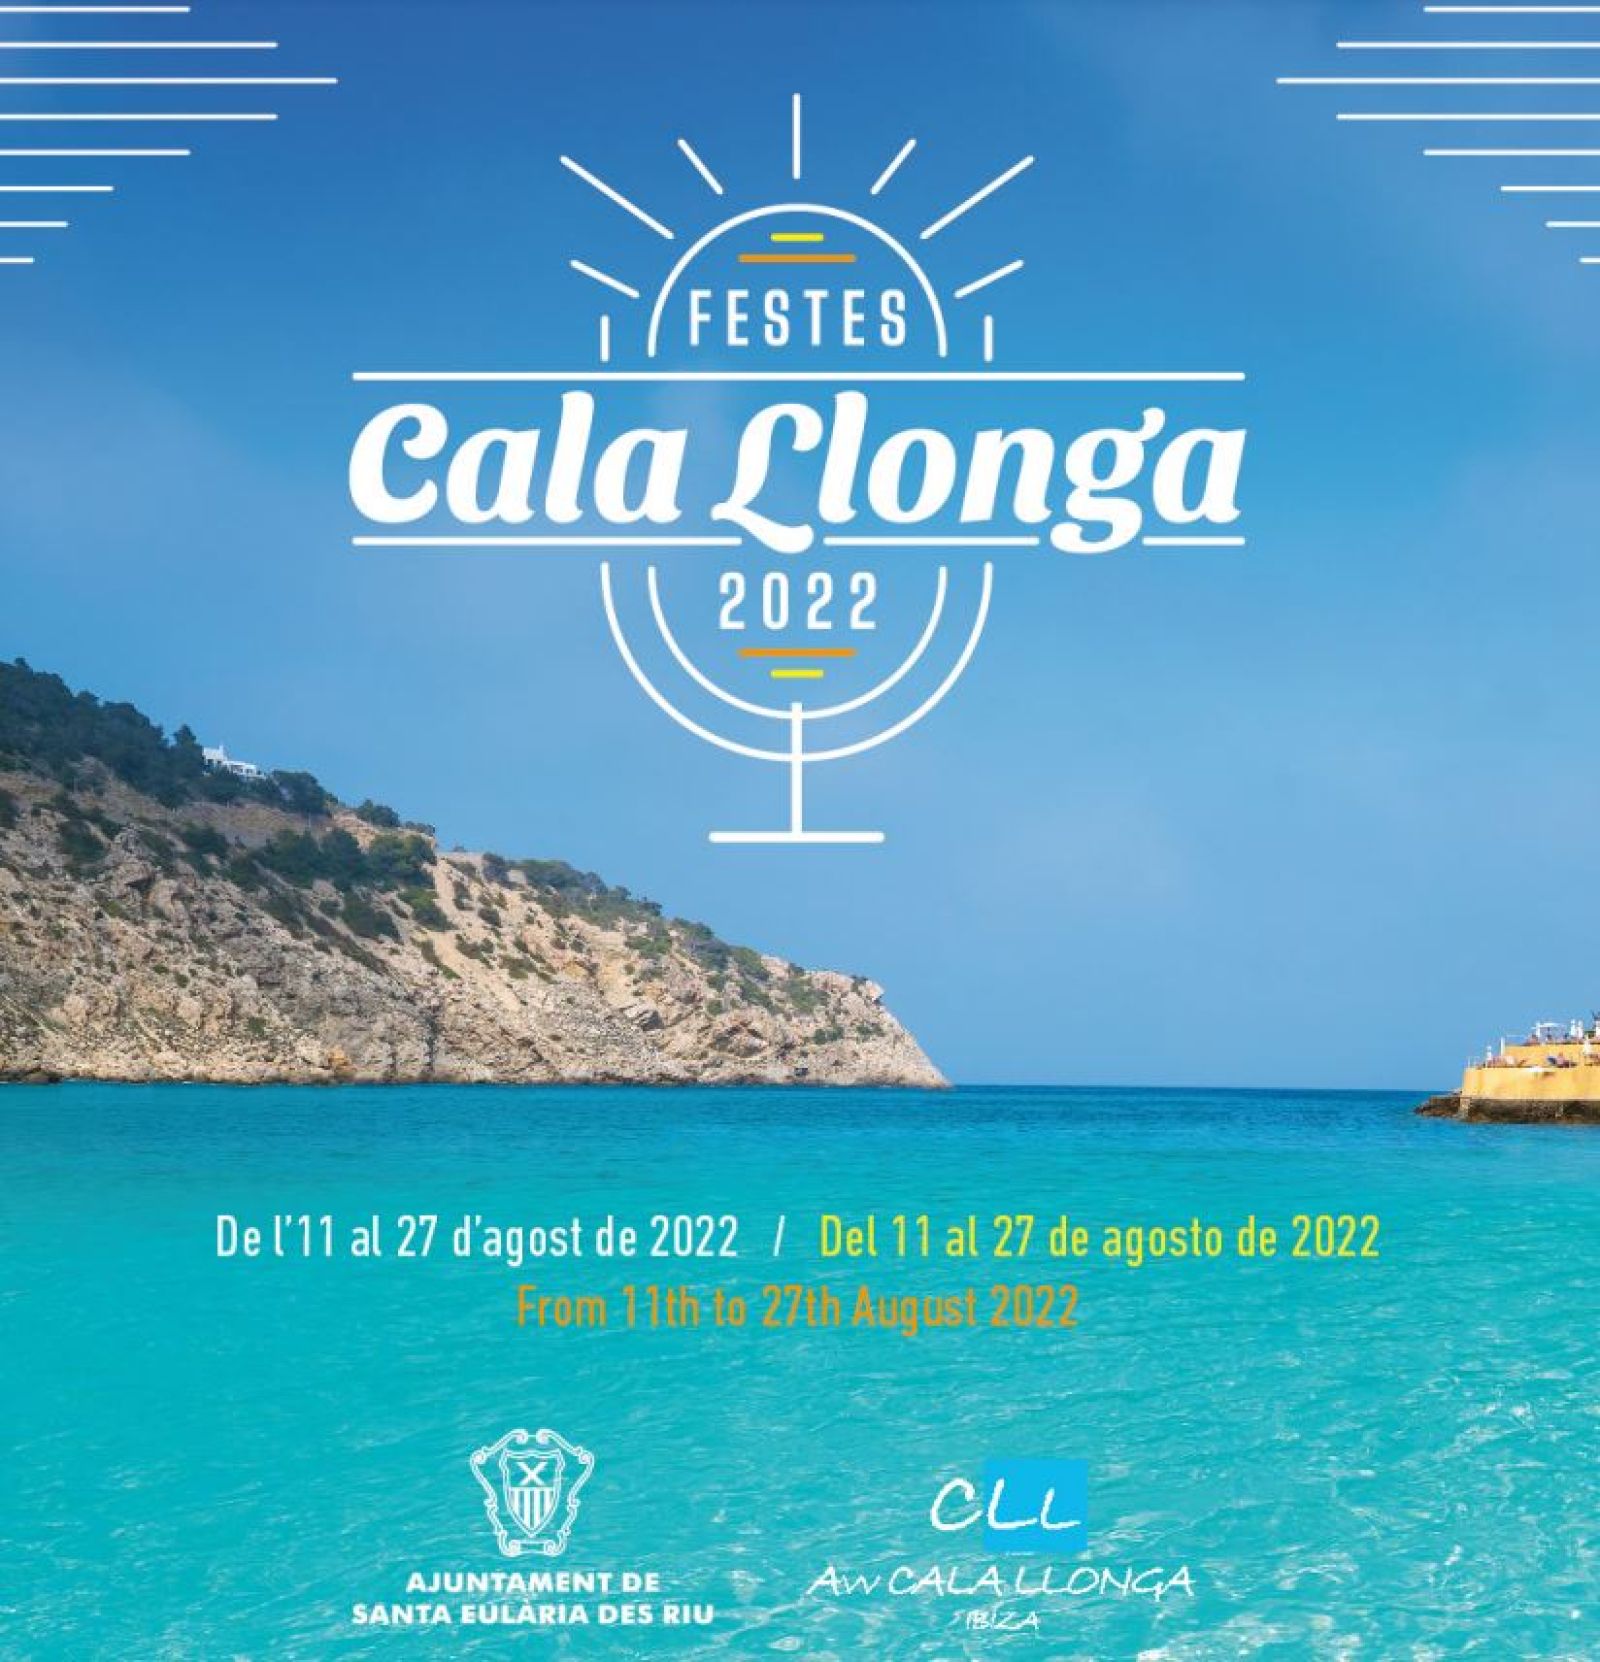 Rugby and volleyball on the beach joins the music and traditional events in the festivities of Cala Llonga 2022